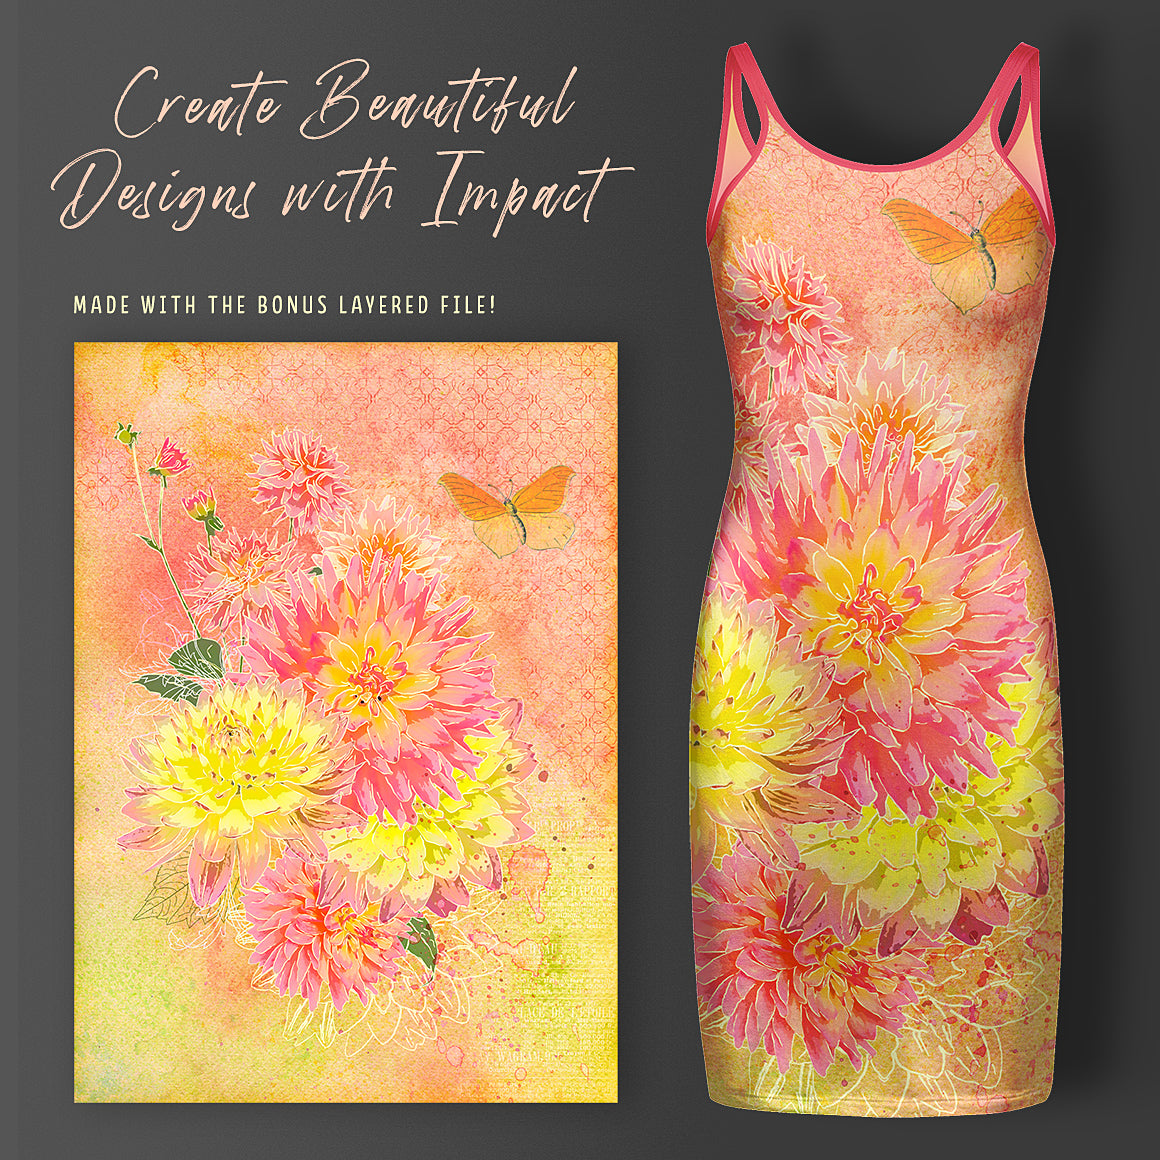 Photographic design on a dress mockup using the example layered file in the Complete Inspirational Textures and Elements Collection.